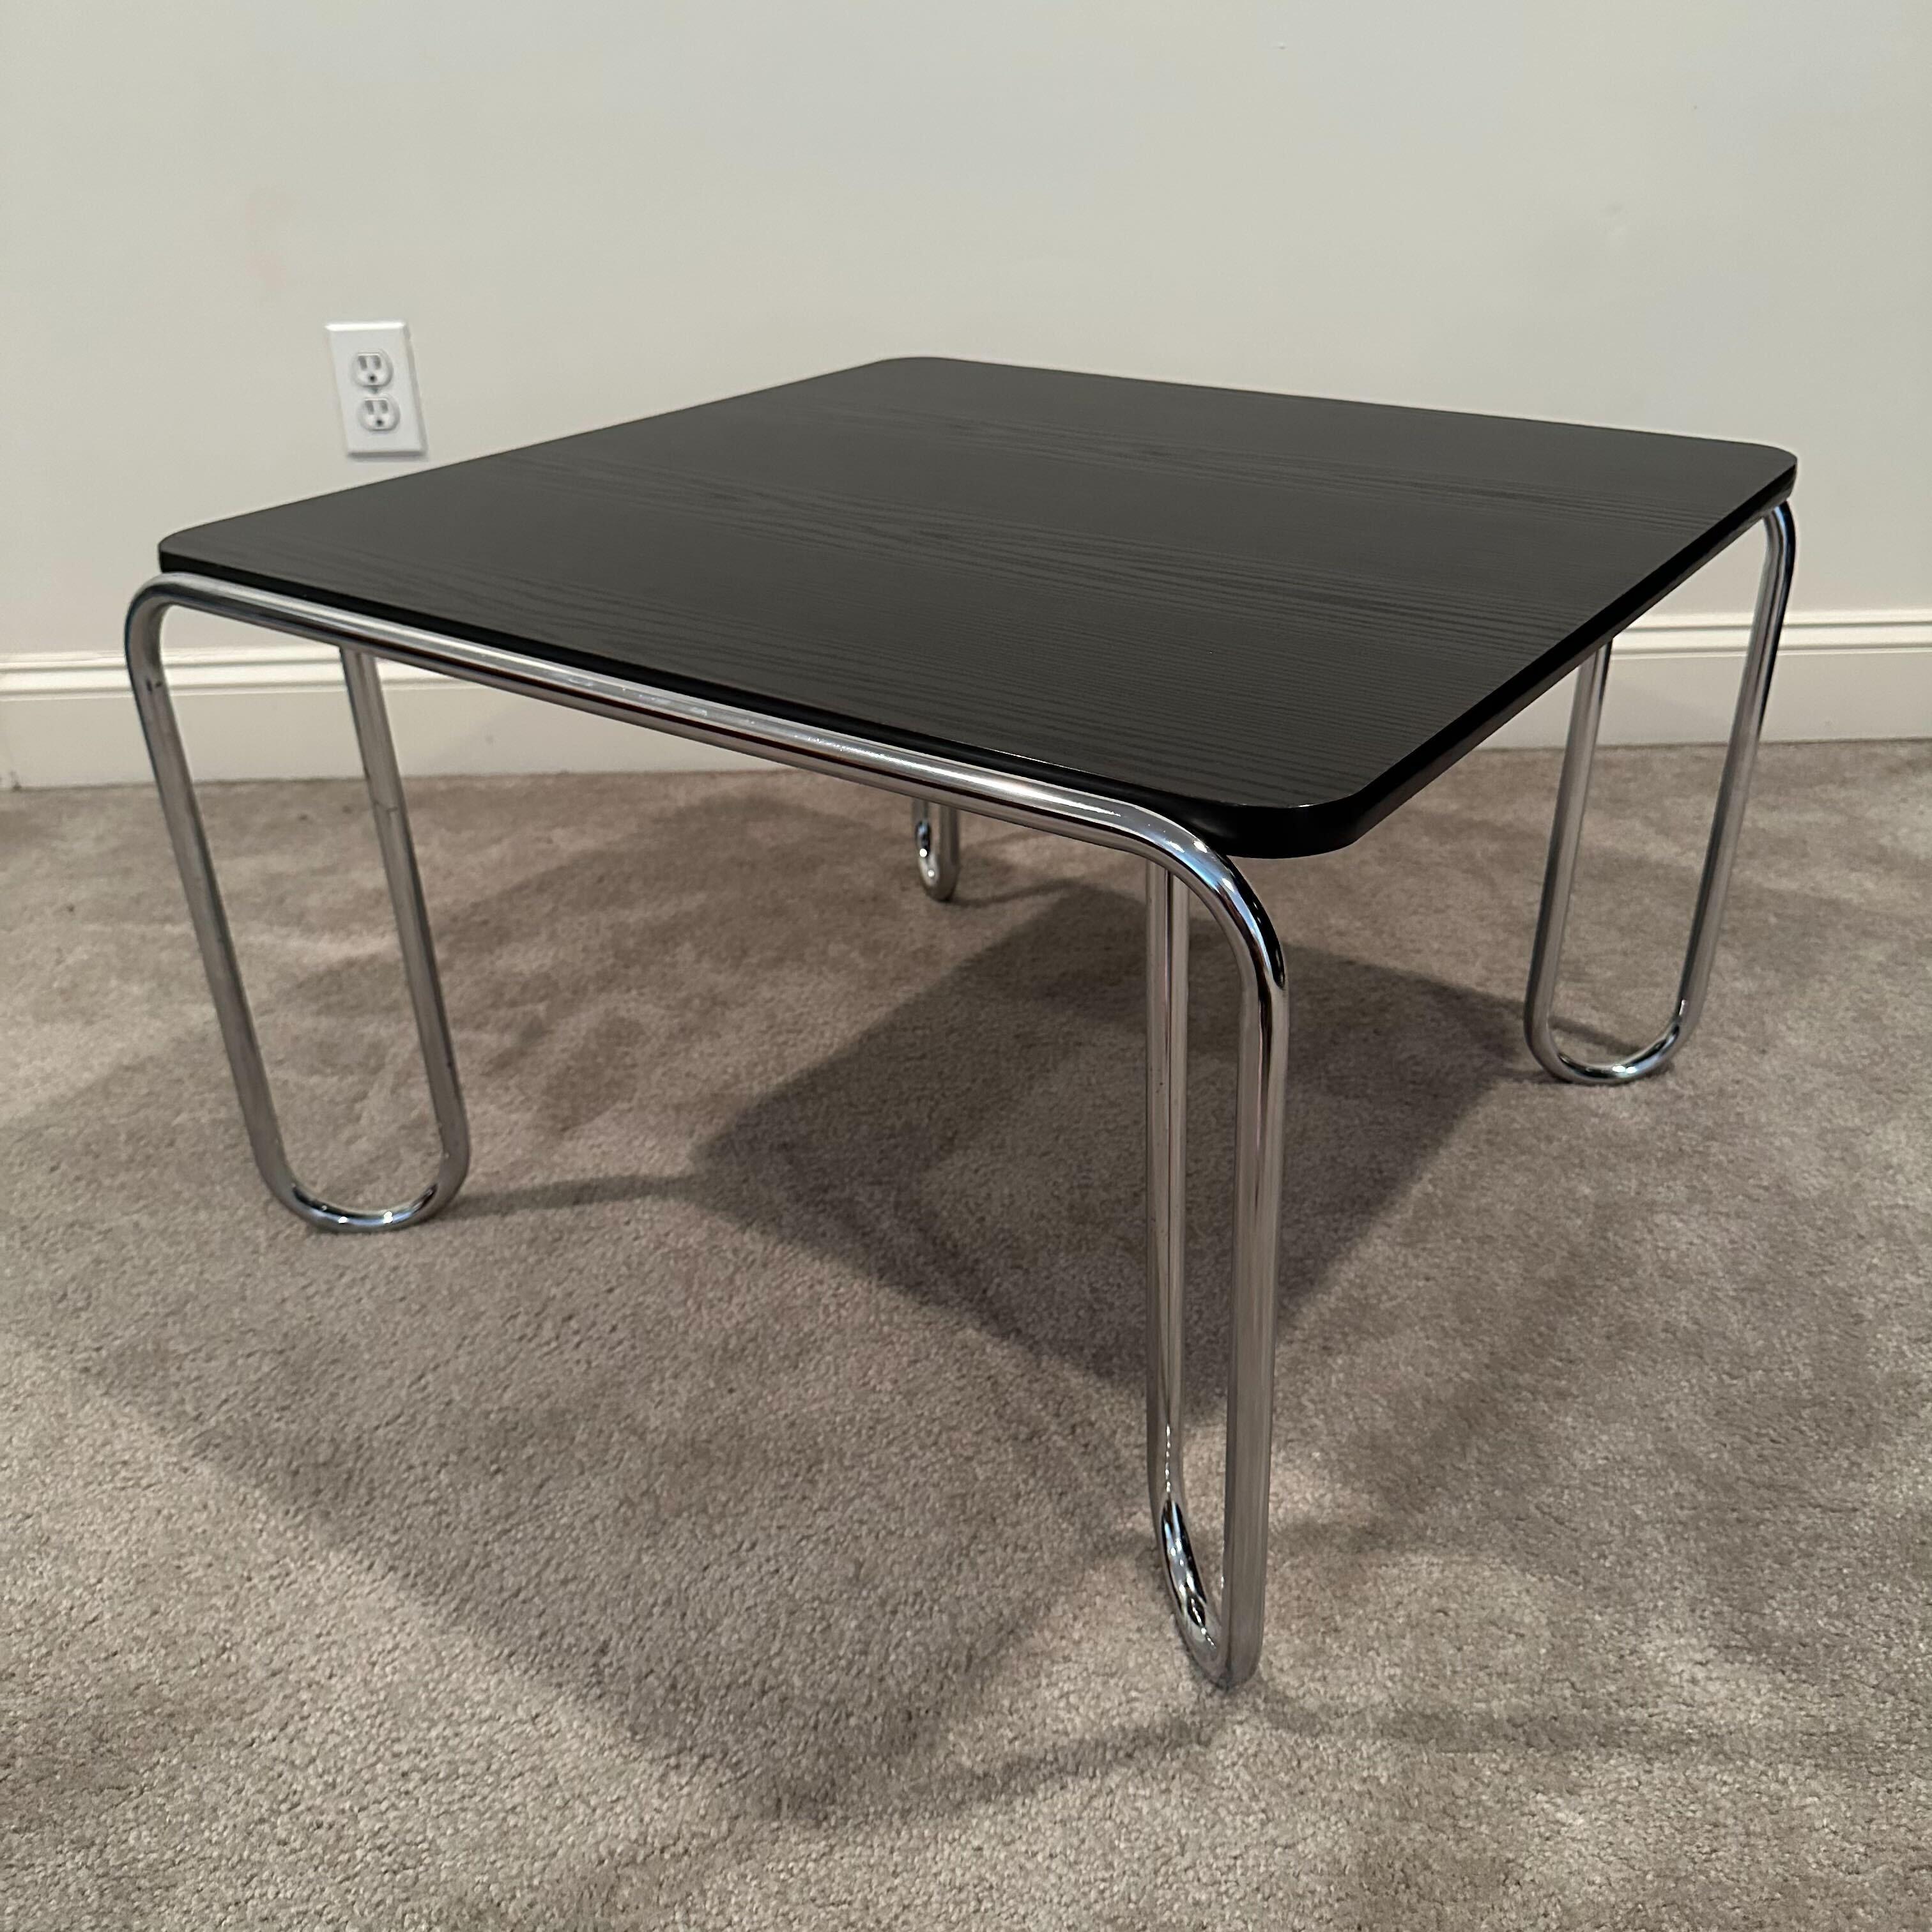 A square black faux wood tabletop supported by looping tubular chrome bar legs, this coffee or cocktail table is in the Modernist or Bauhaus style of Marcel Breuer. The black laminate tabletop is embossed with a textured faux wood grain. Polished